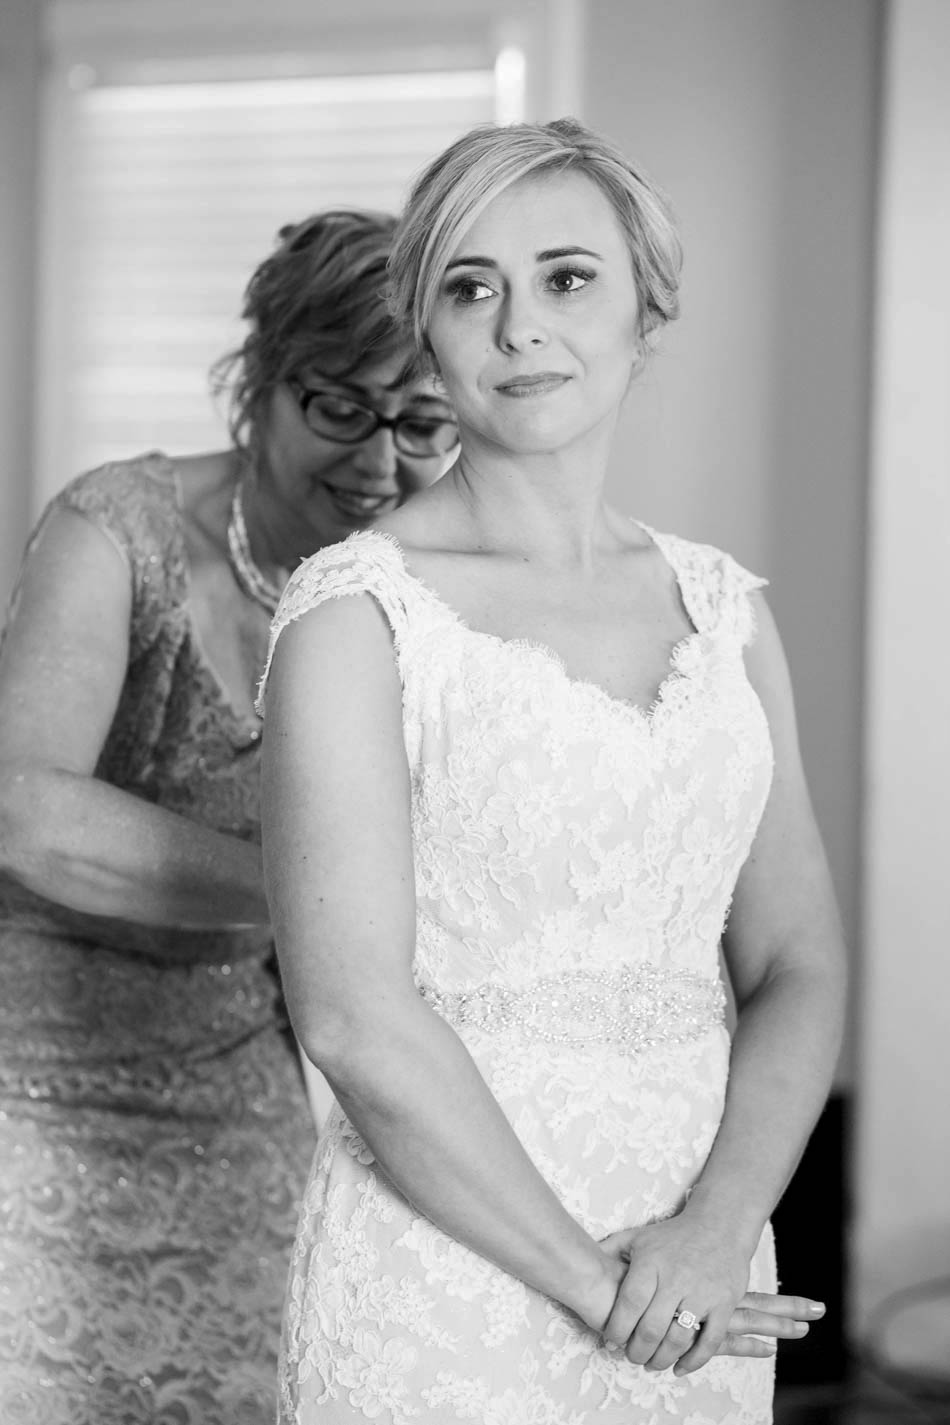 Bride gets into dress, Alhambra Hall, Mt Pleasant, South Carolina Kate Timbers Photography. http://katetimbers.com #katetimbersphotography // Charleston Photography // Inspiration